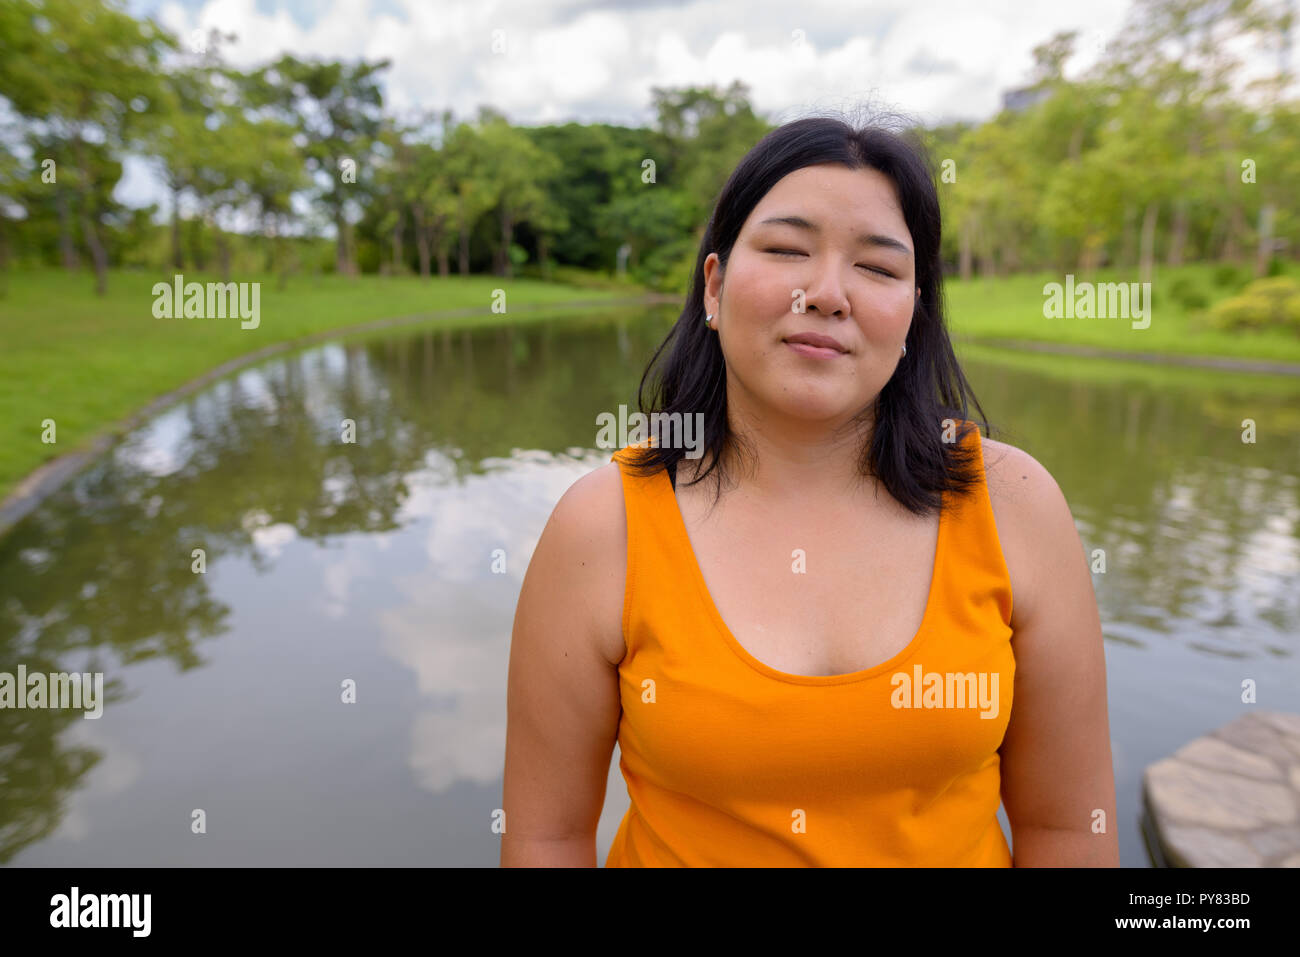 Beautiful overweight Asian woman relaxing with eyes closed in park Stock Photo